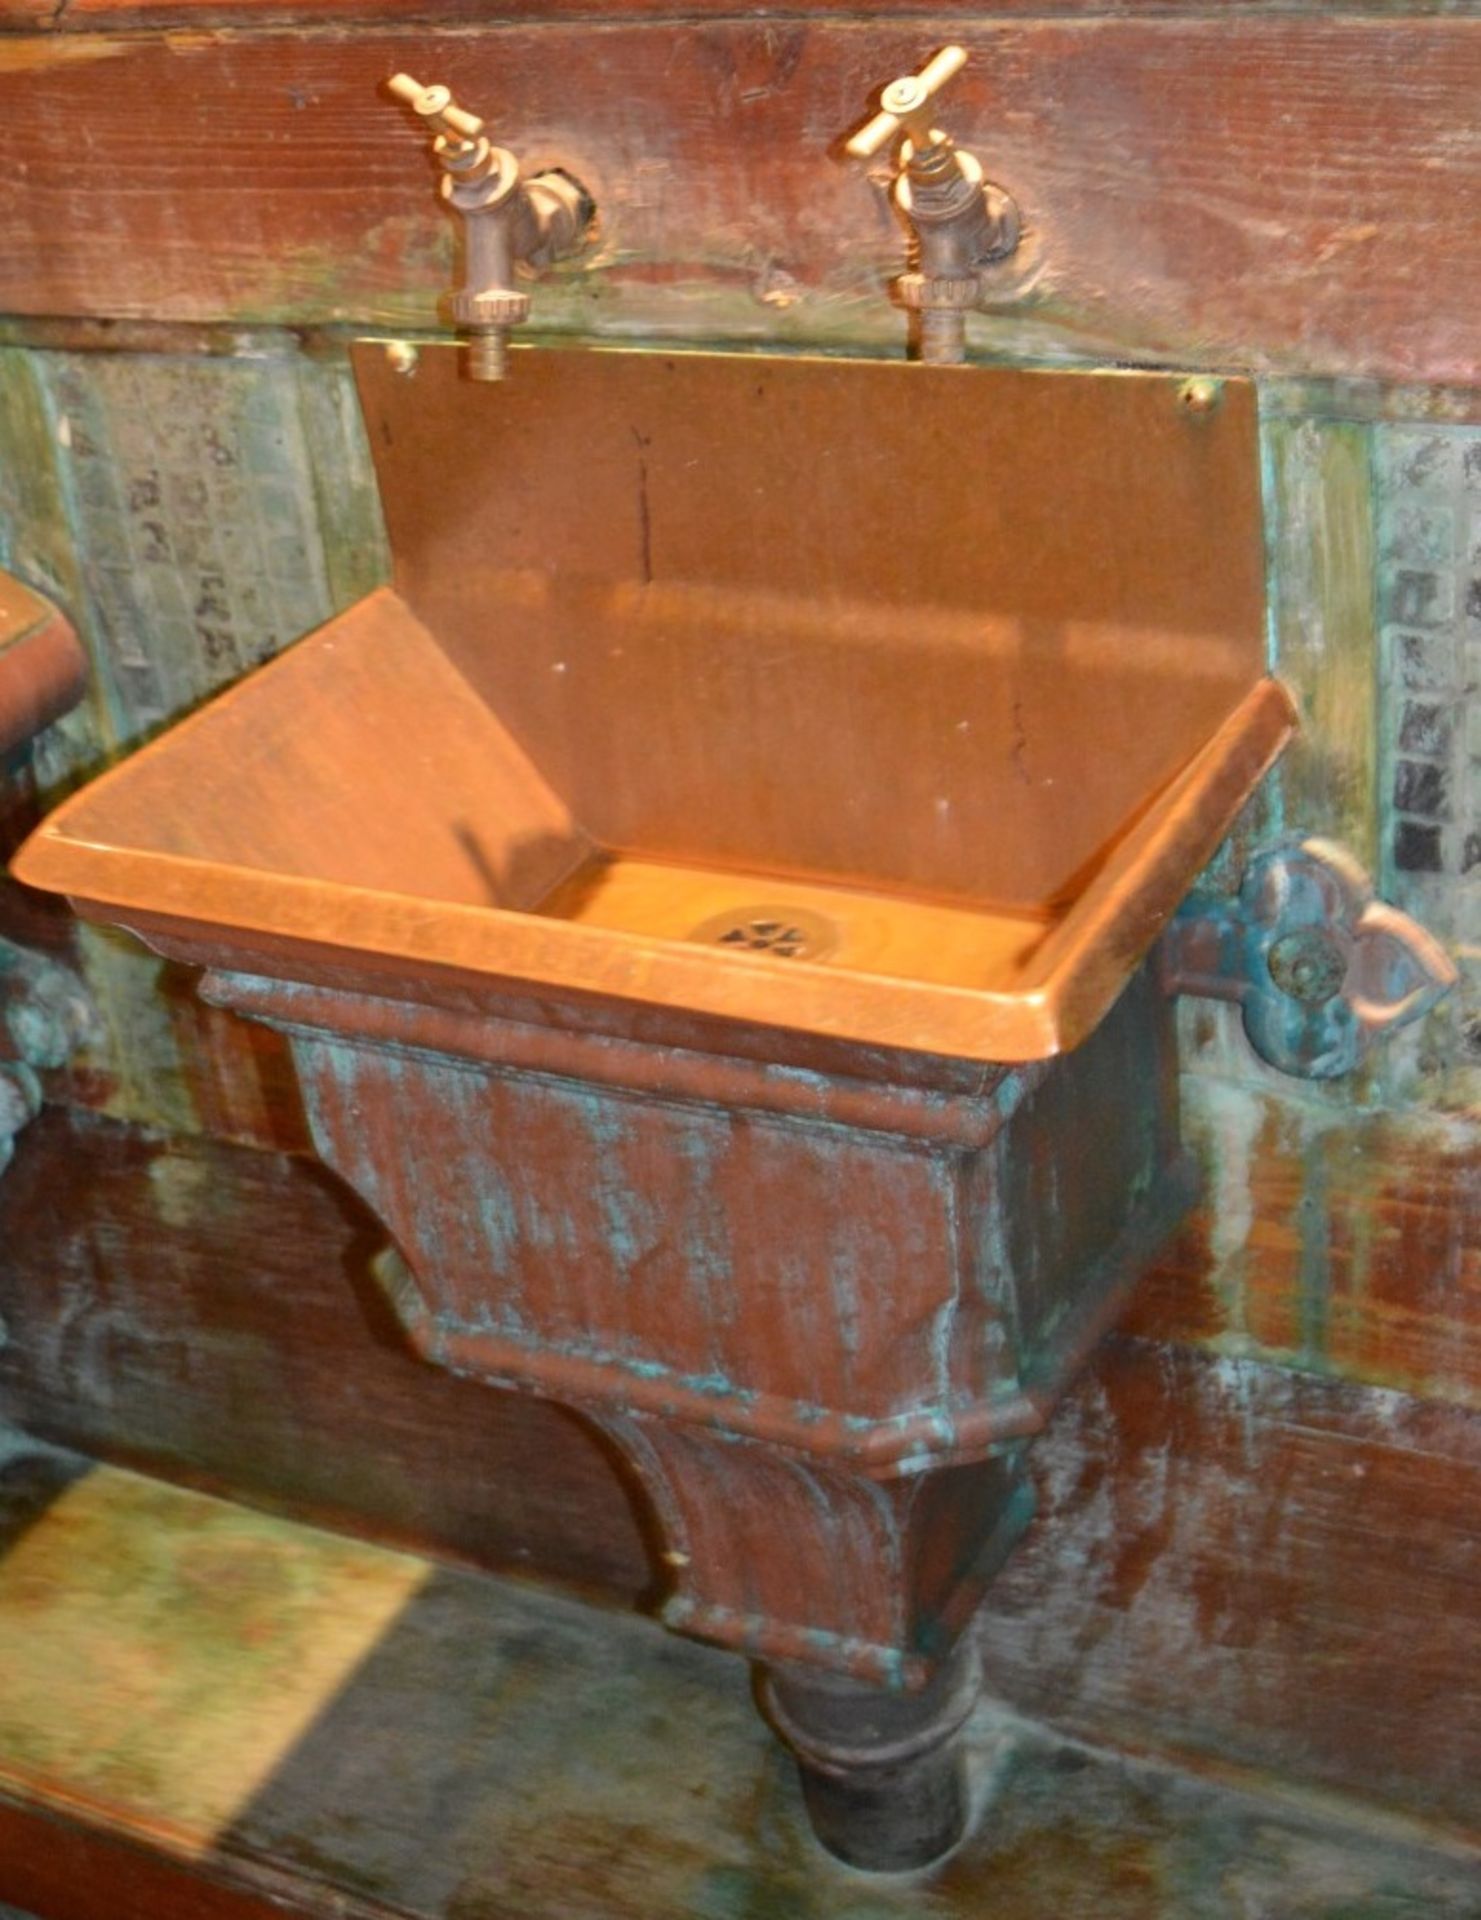 1 x Copper Gutter Leader Hopper Head - Customised Wall Mounted Sink Basin - This is a reclaimed - Image 3 of 3